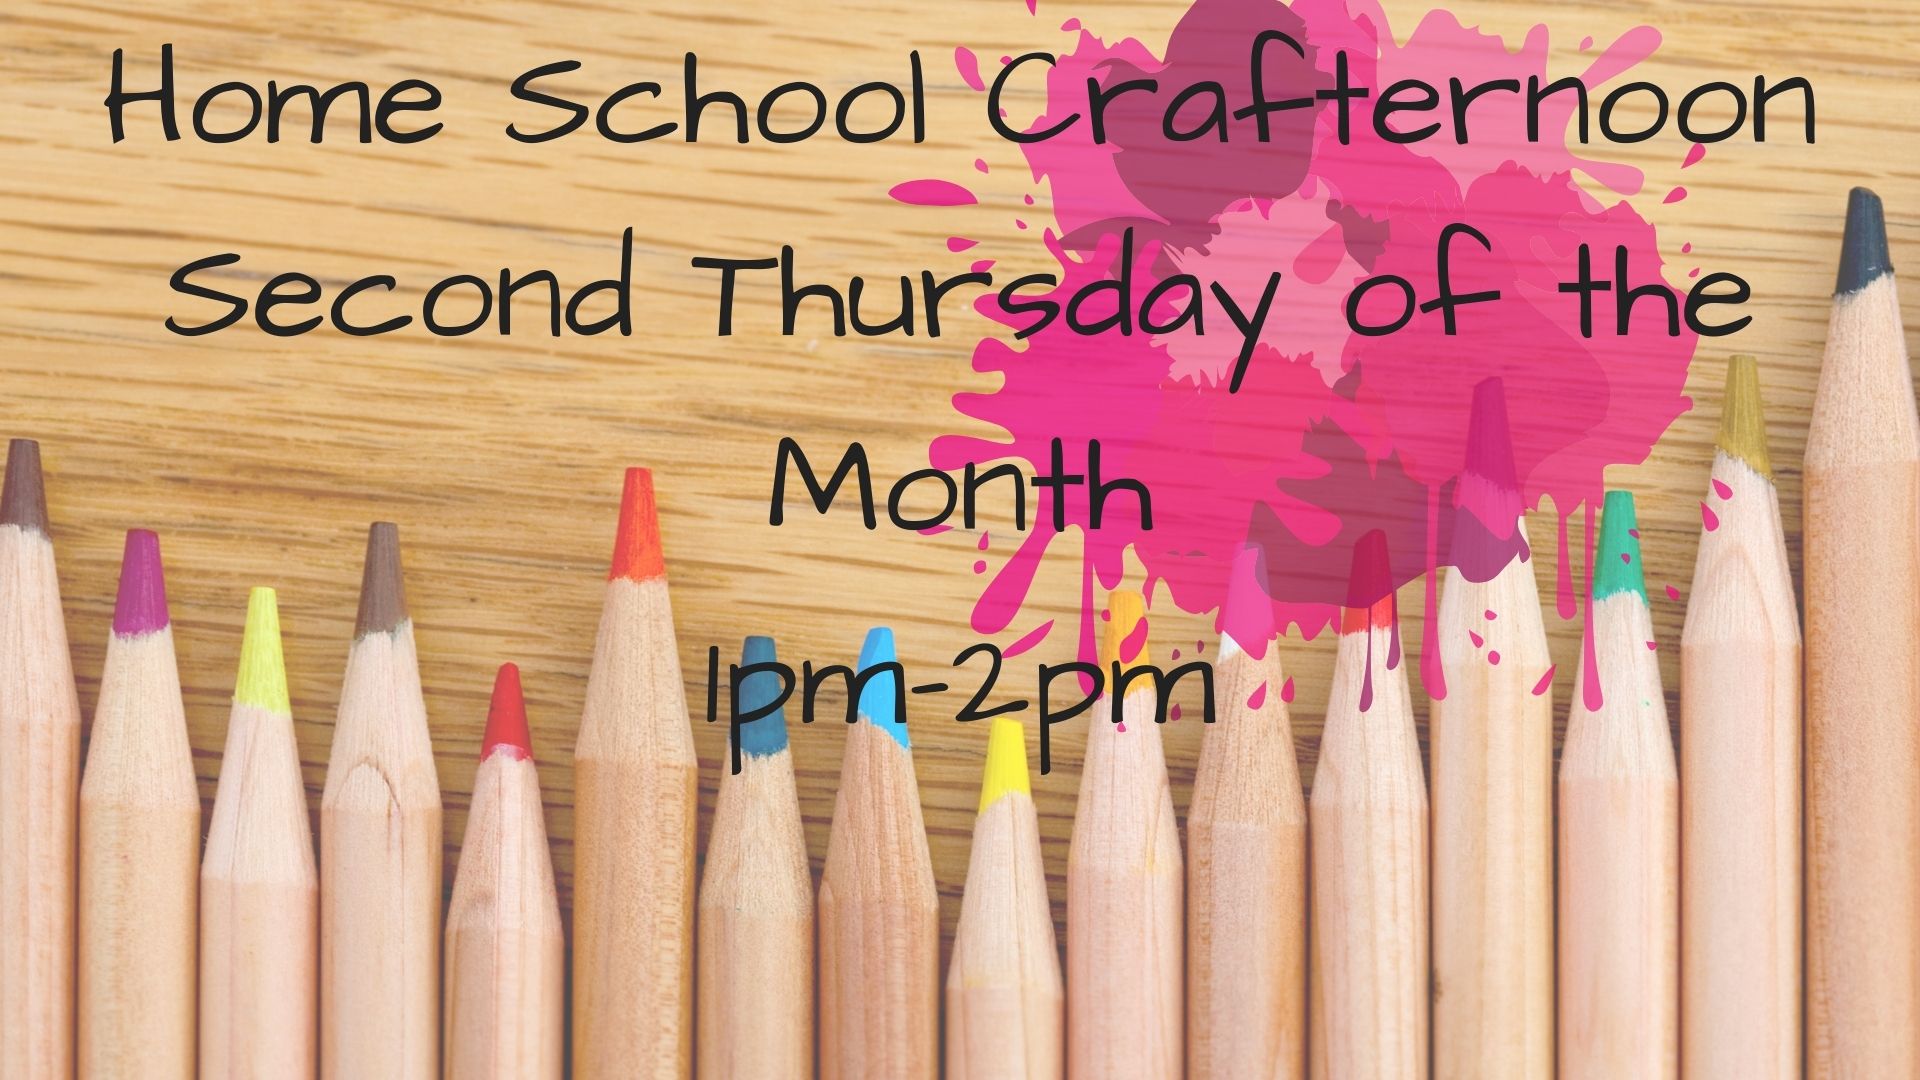 Homeschool Crafternoon, Second Thursday of the Month